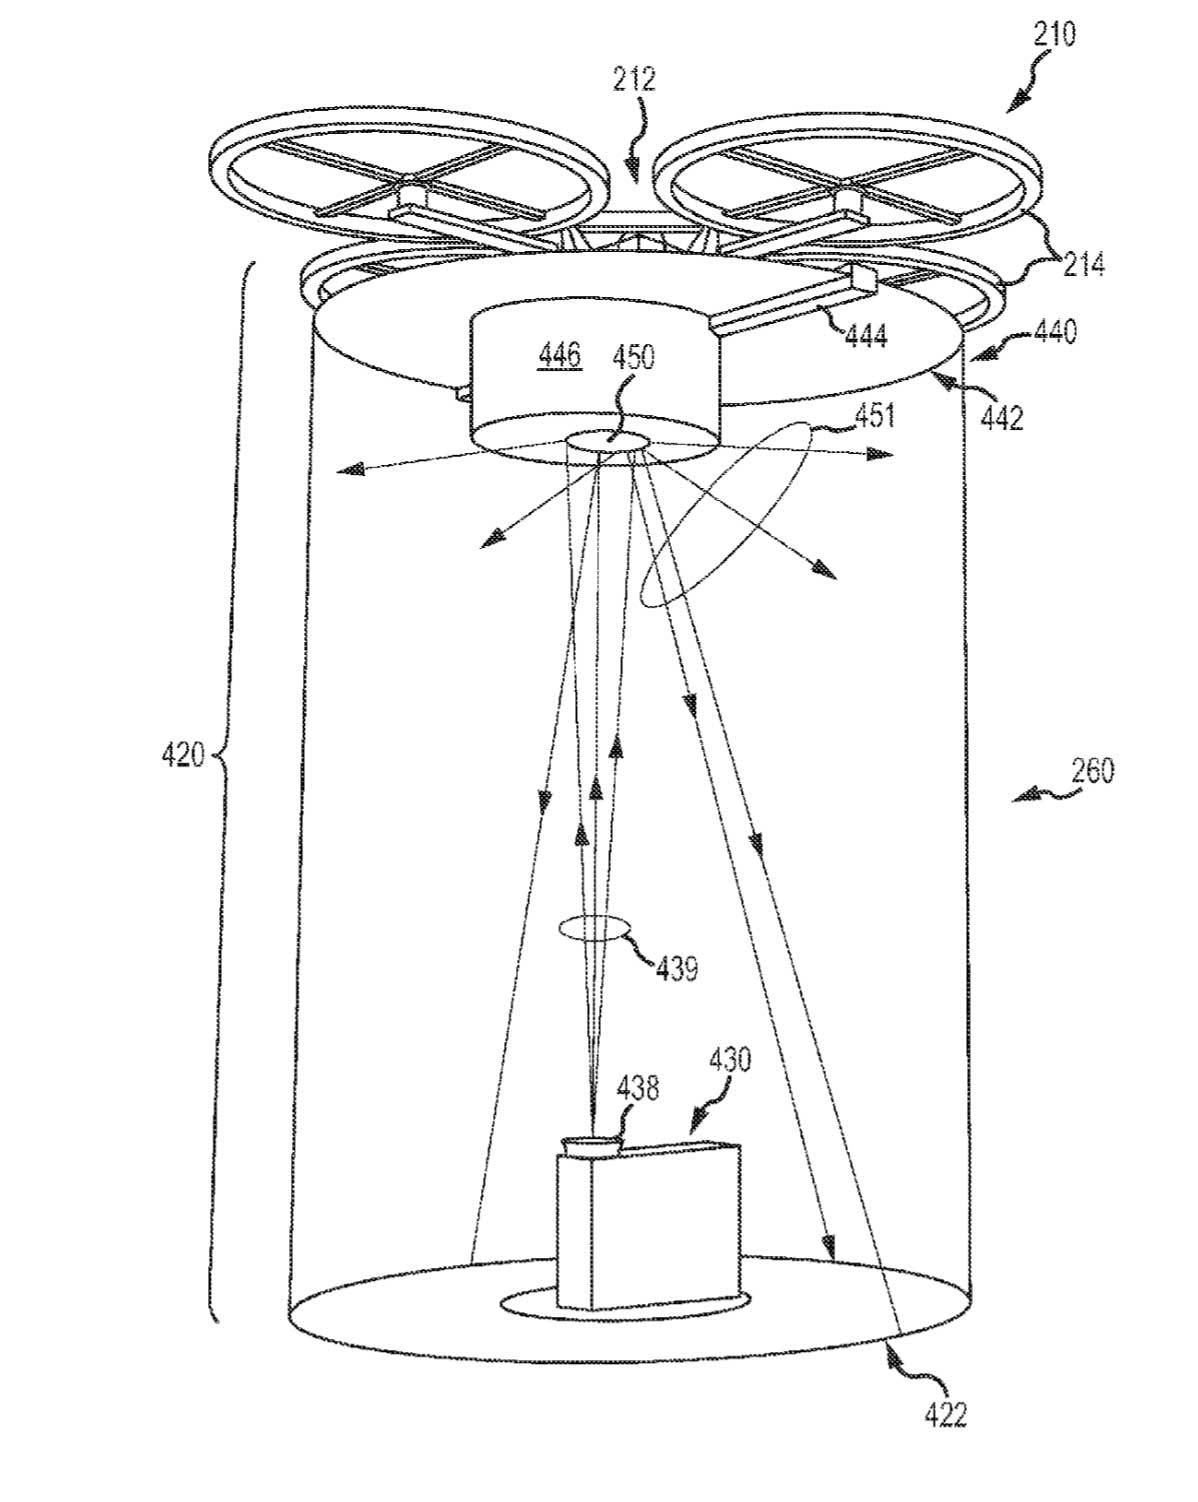 Drone Projection patent